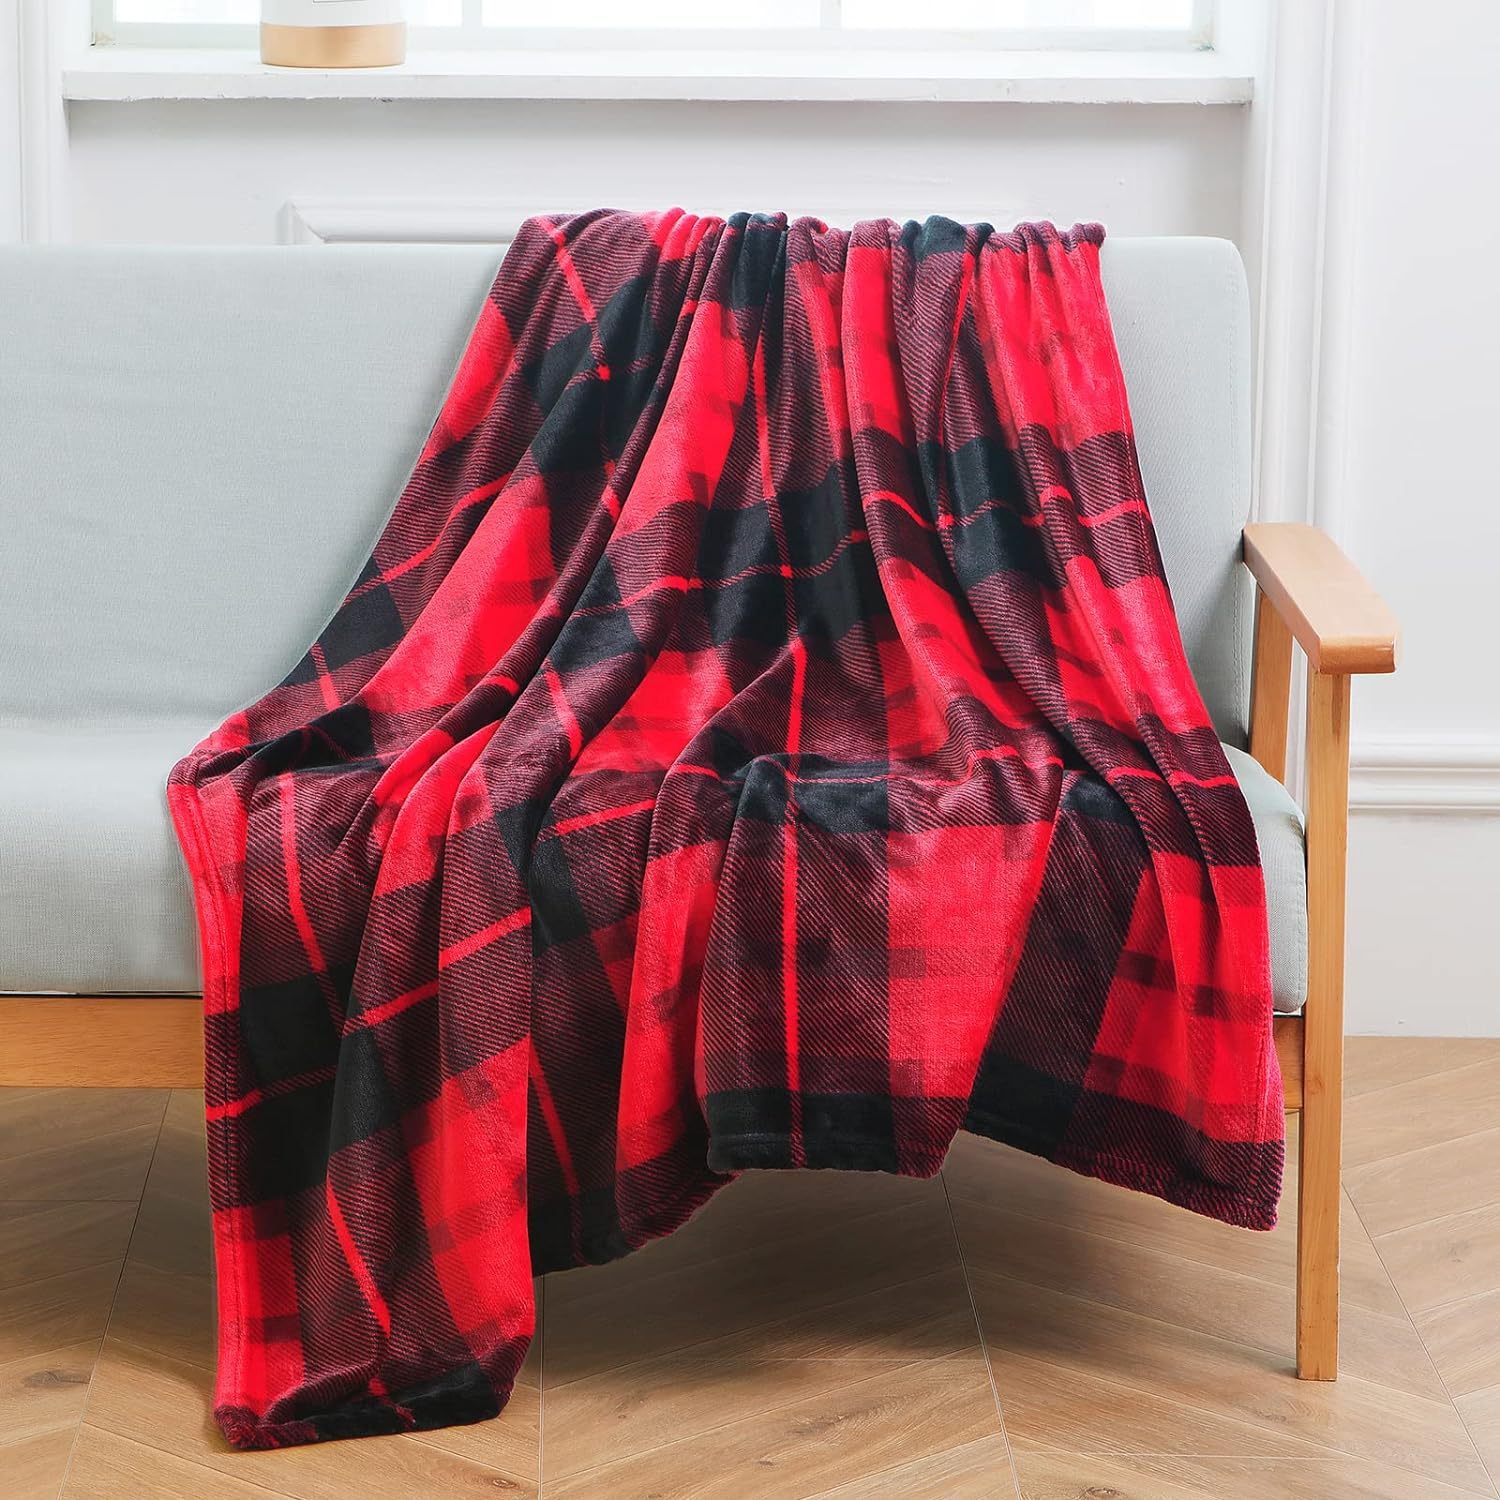 thinkstar Flannel Fleece Throw Blanket 60 × 80 Inches, All Season Plaid Red Blanket For Bed, Couch, Car